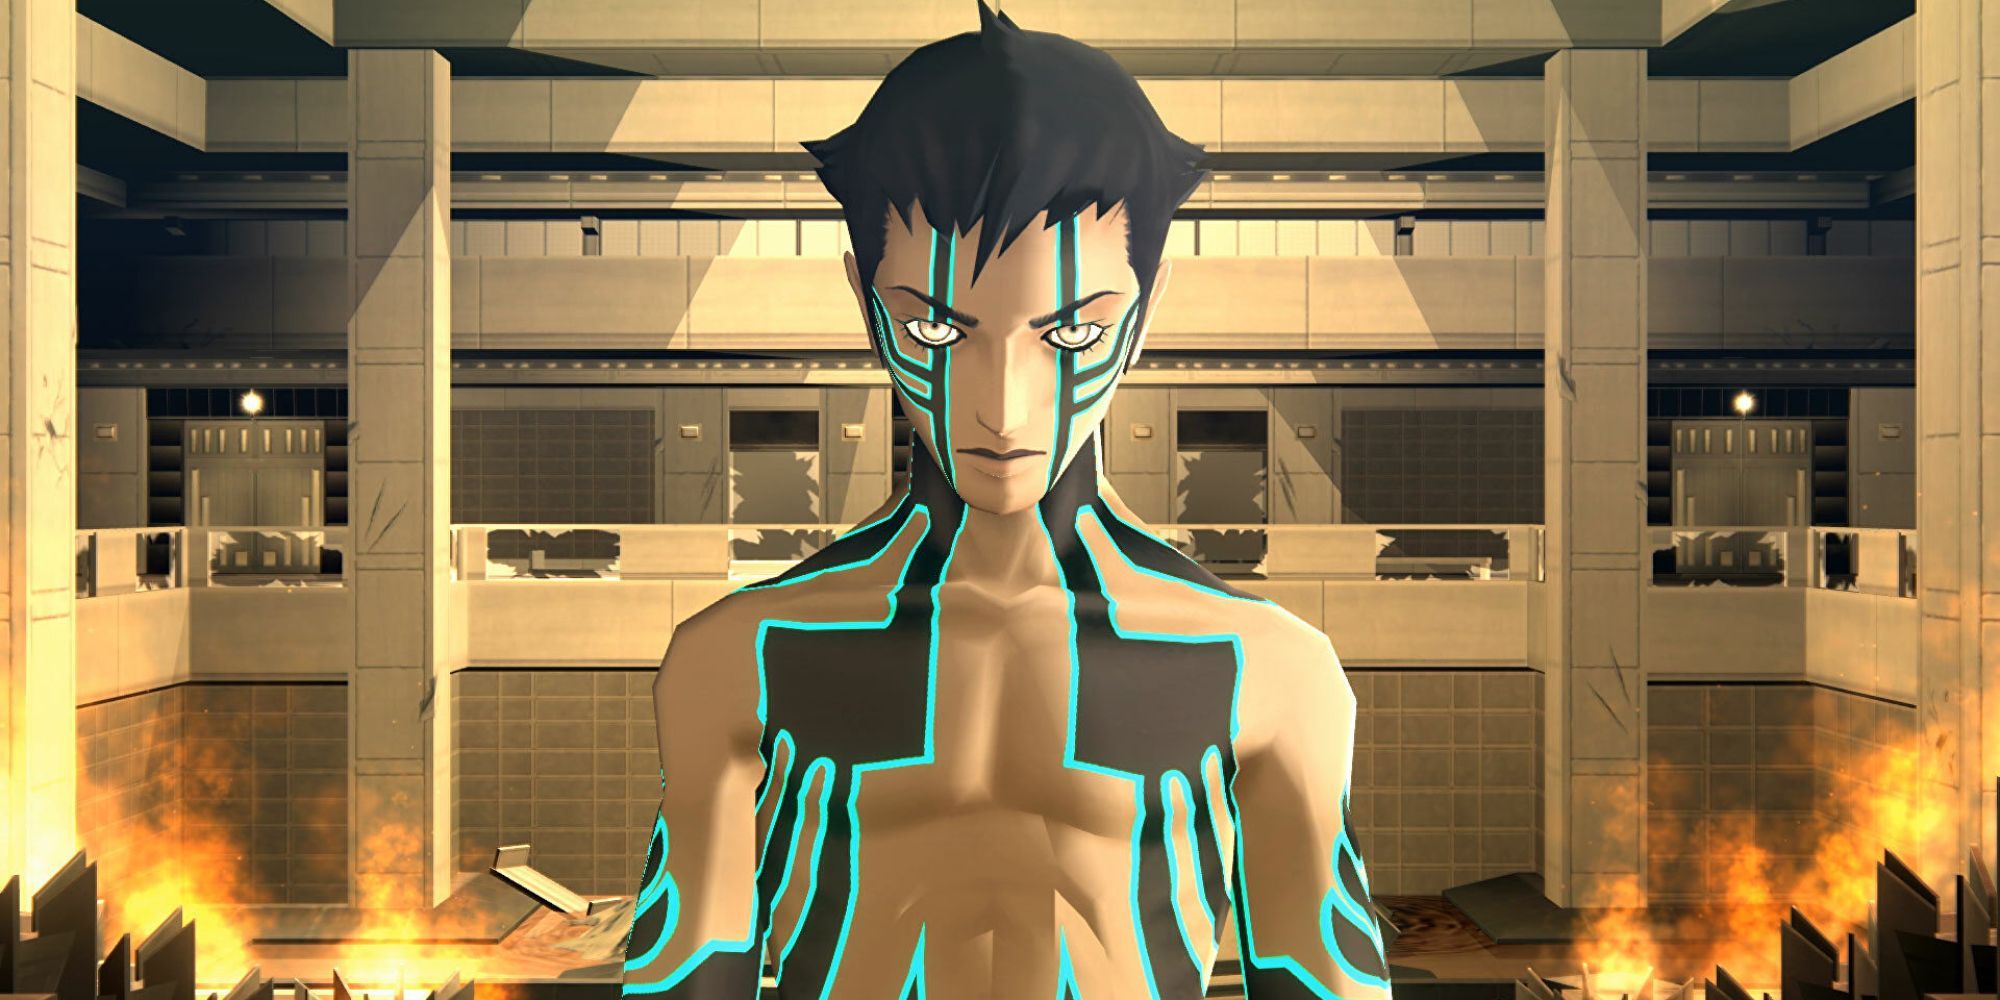 A character staring at the player with fire behind him in Shin Megami Tensei 3: Nocturne